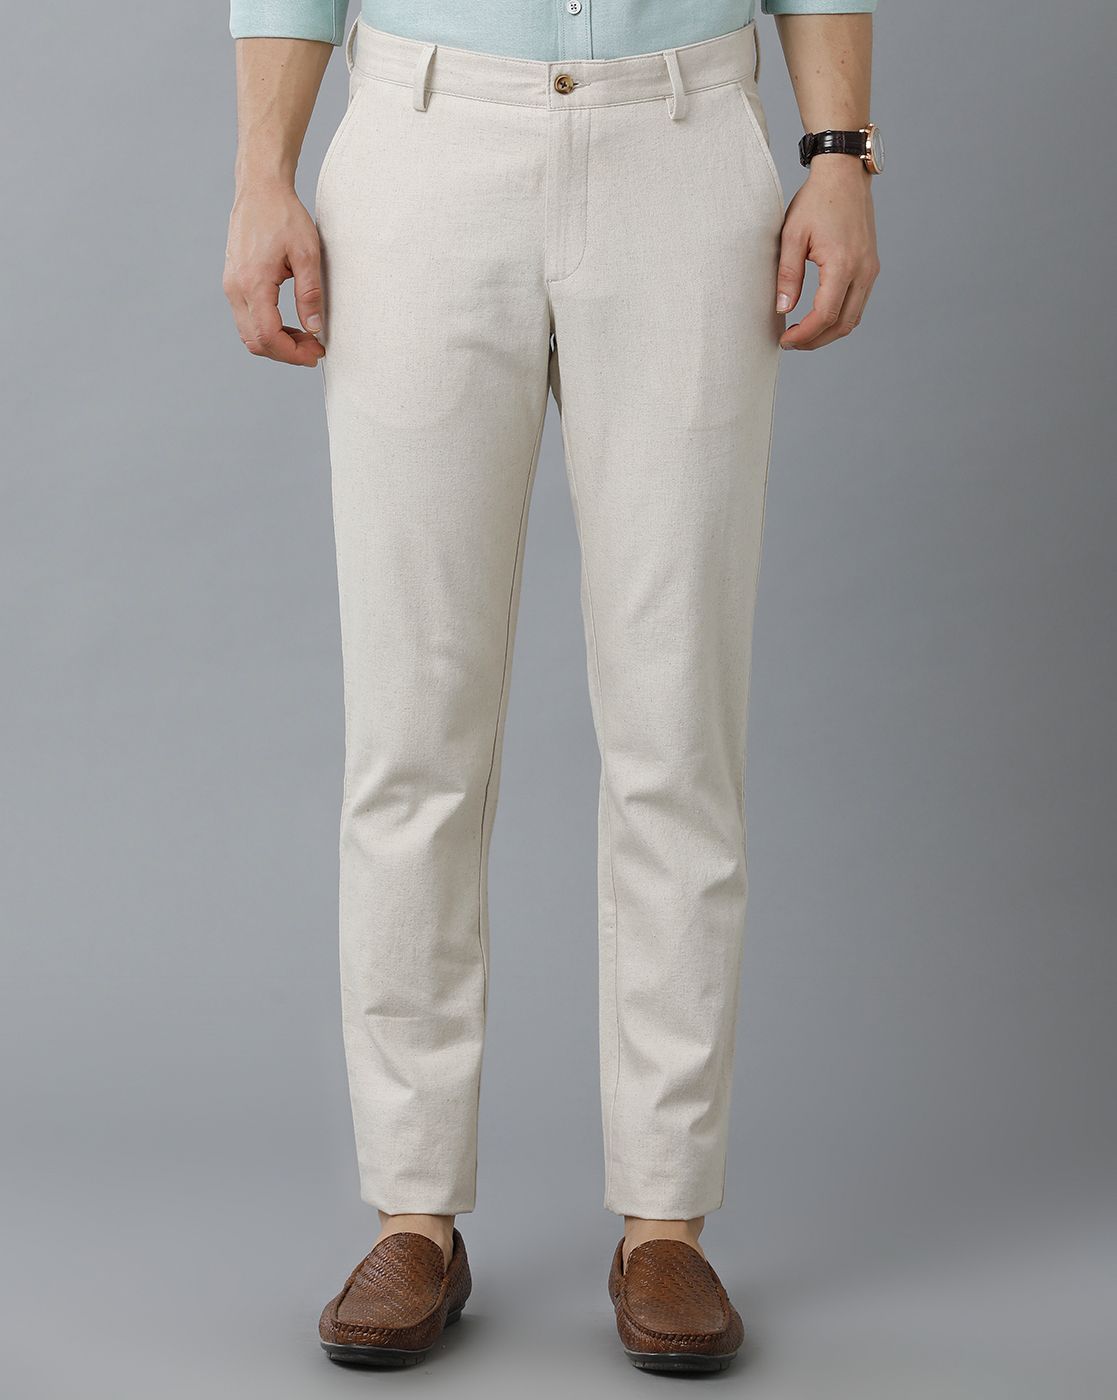 OFF WHITE LINEN PANT RELAXED TAPERED FIT  ROOKIES